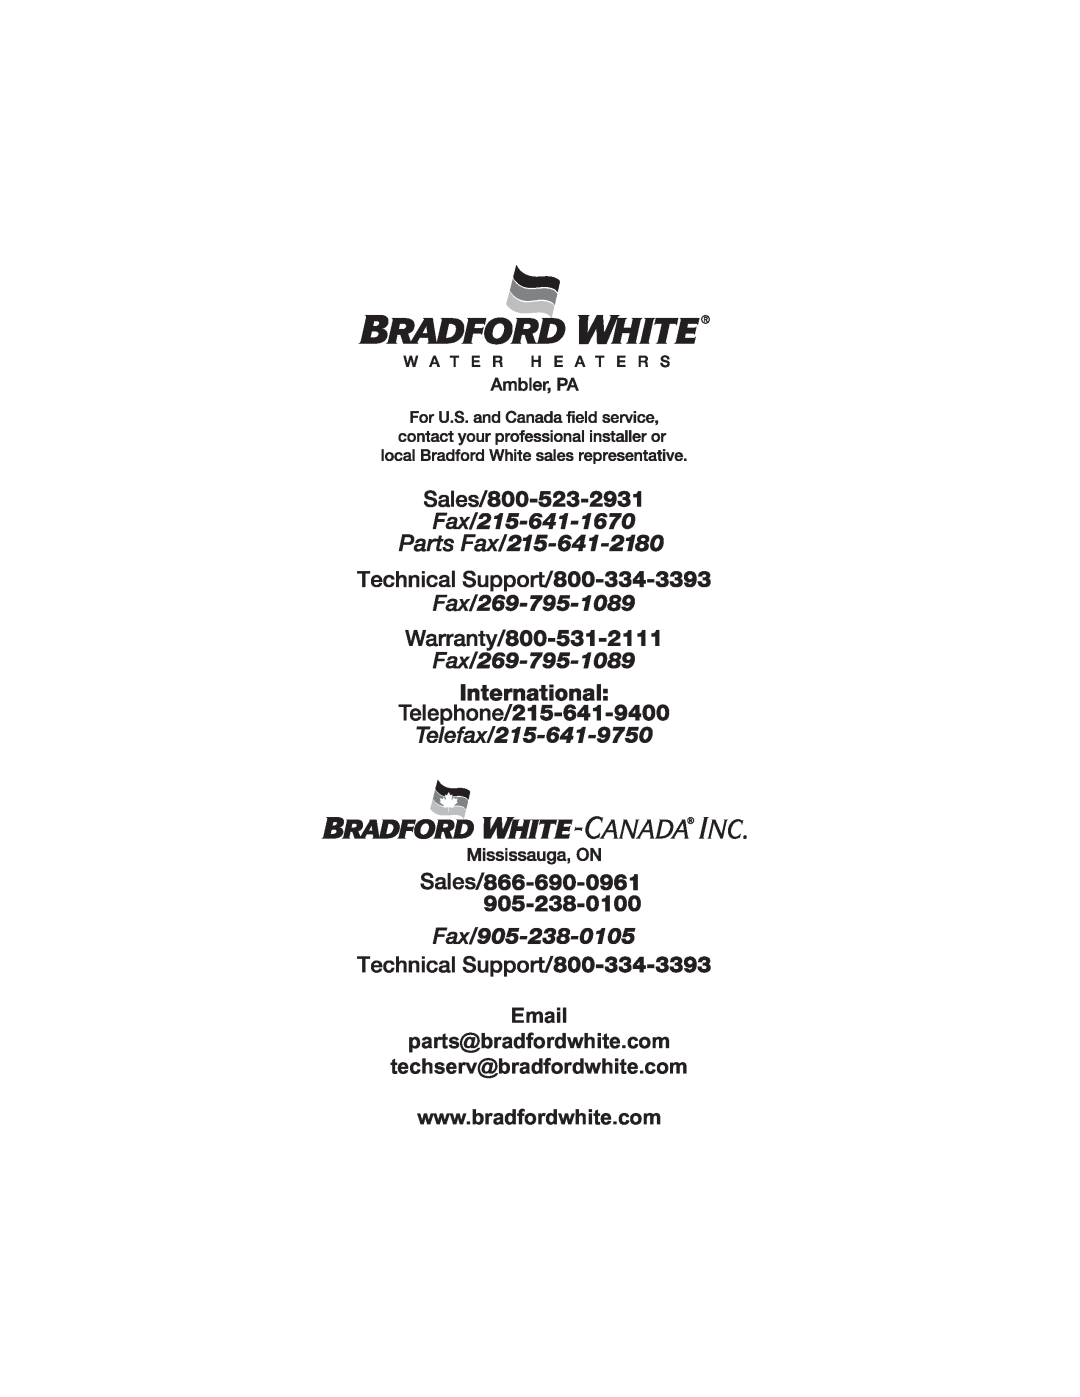 Bradford-White Corp PDX2 dimensions Email parts@bradfordwhite.com techserv@bradfordwhite.com 